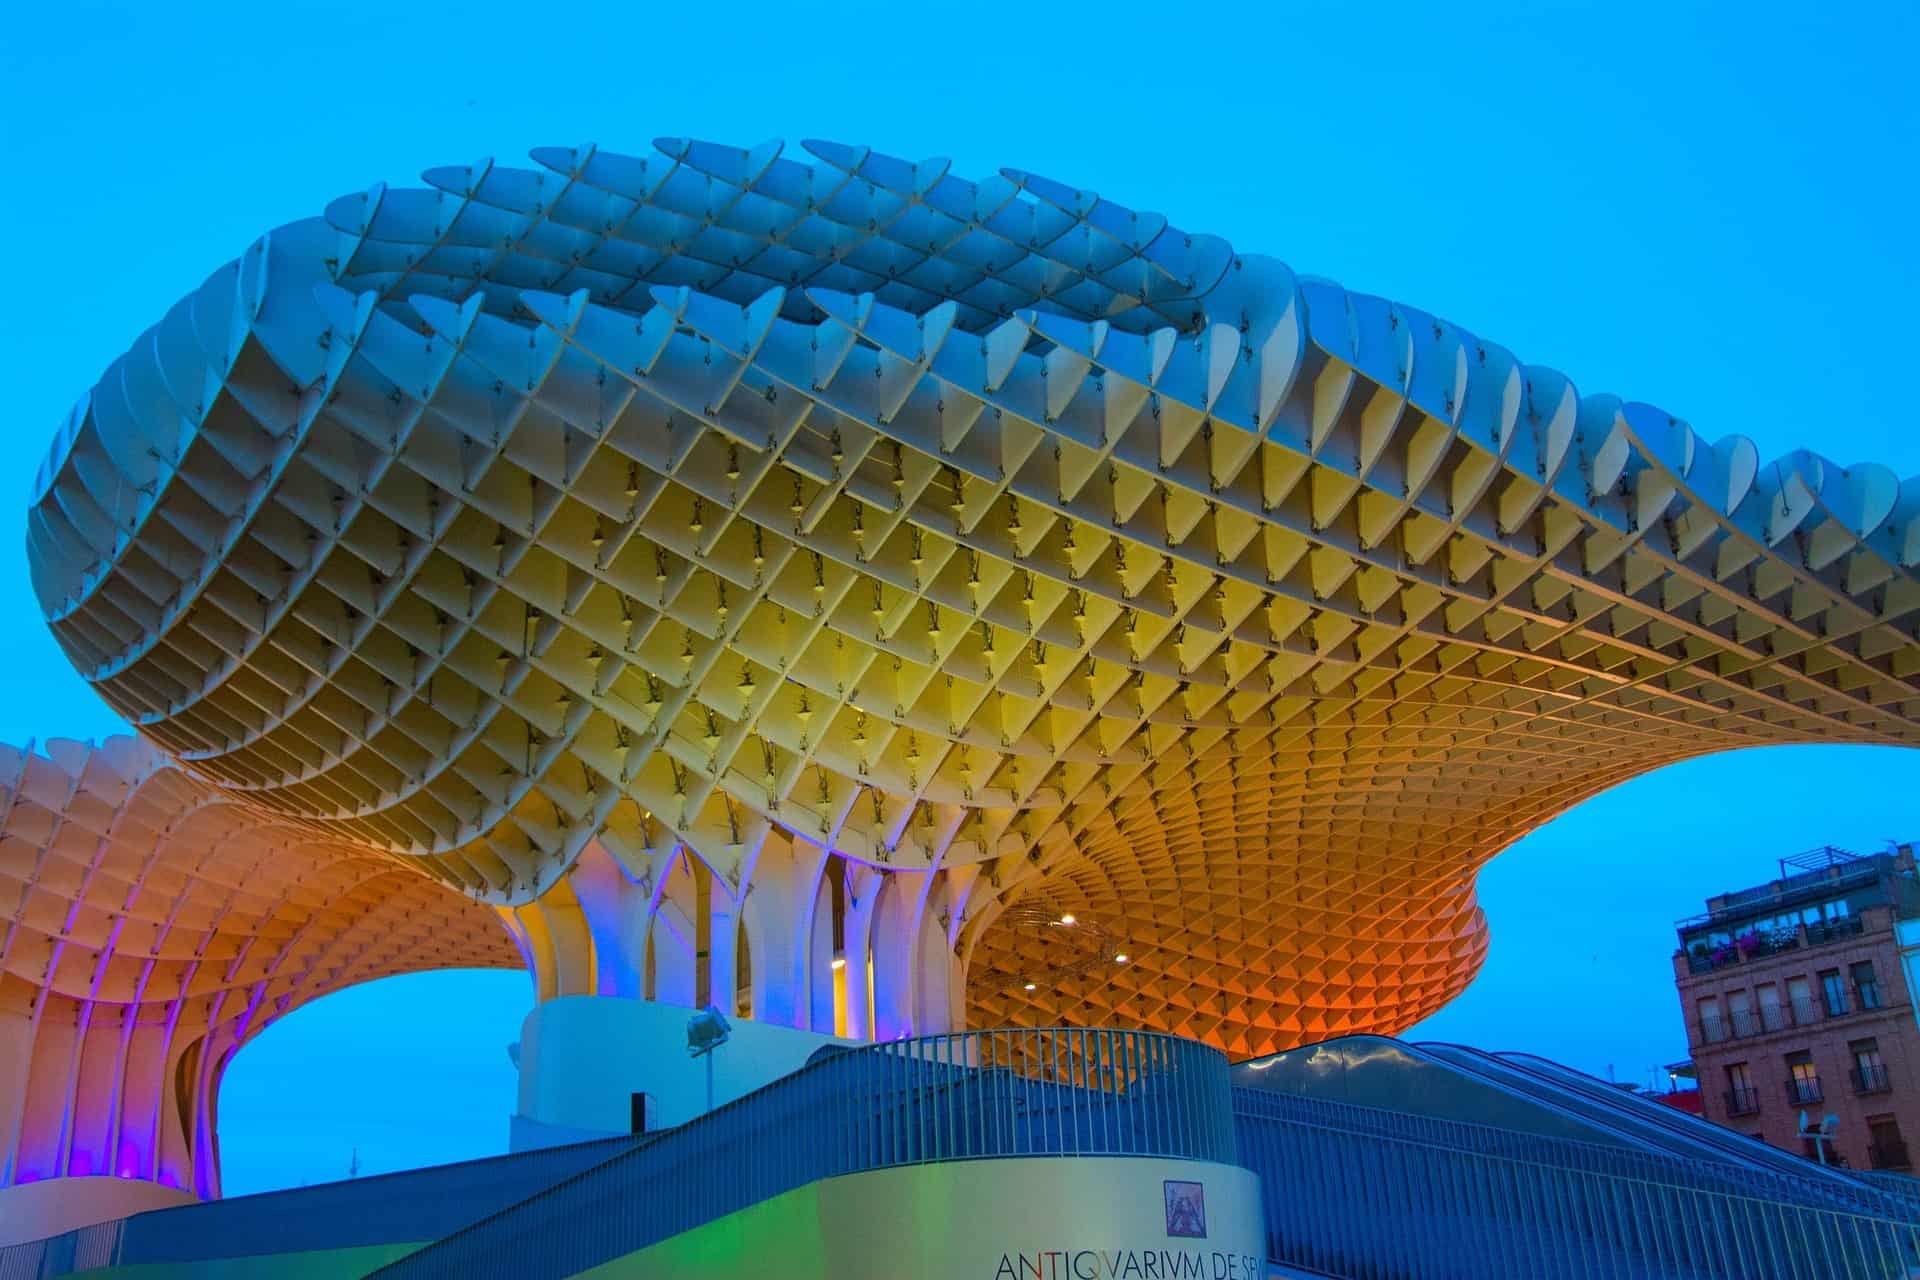 Best things to do in Seville see the Setas at night lit up